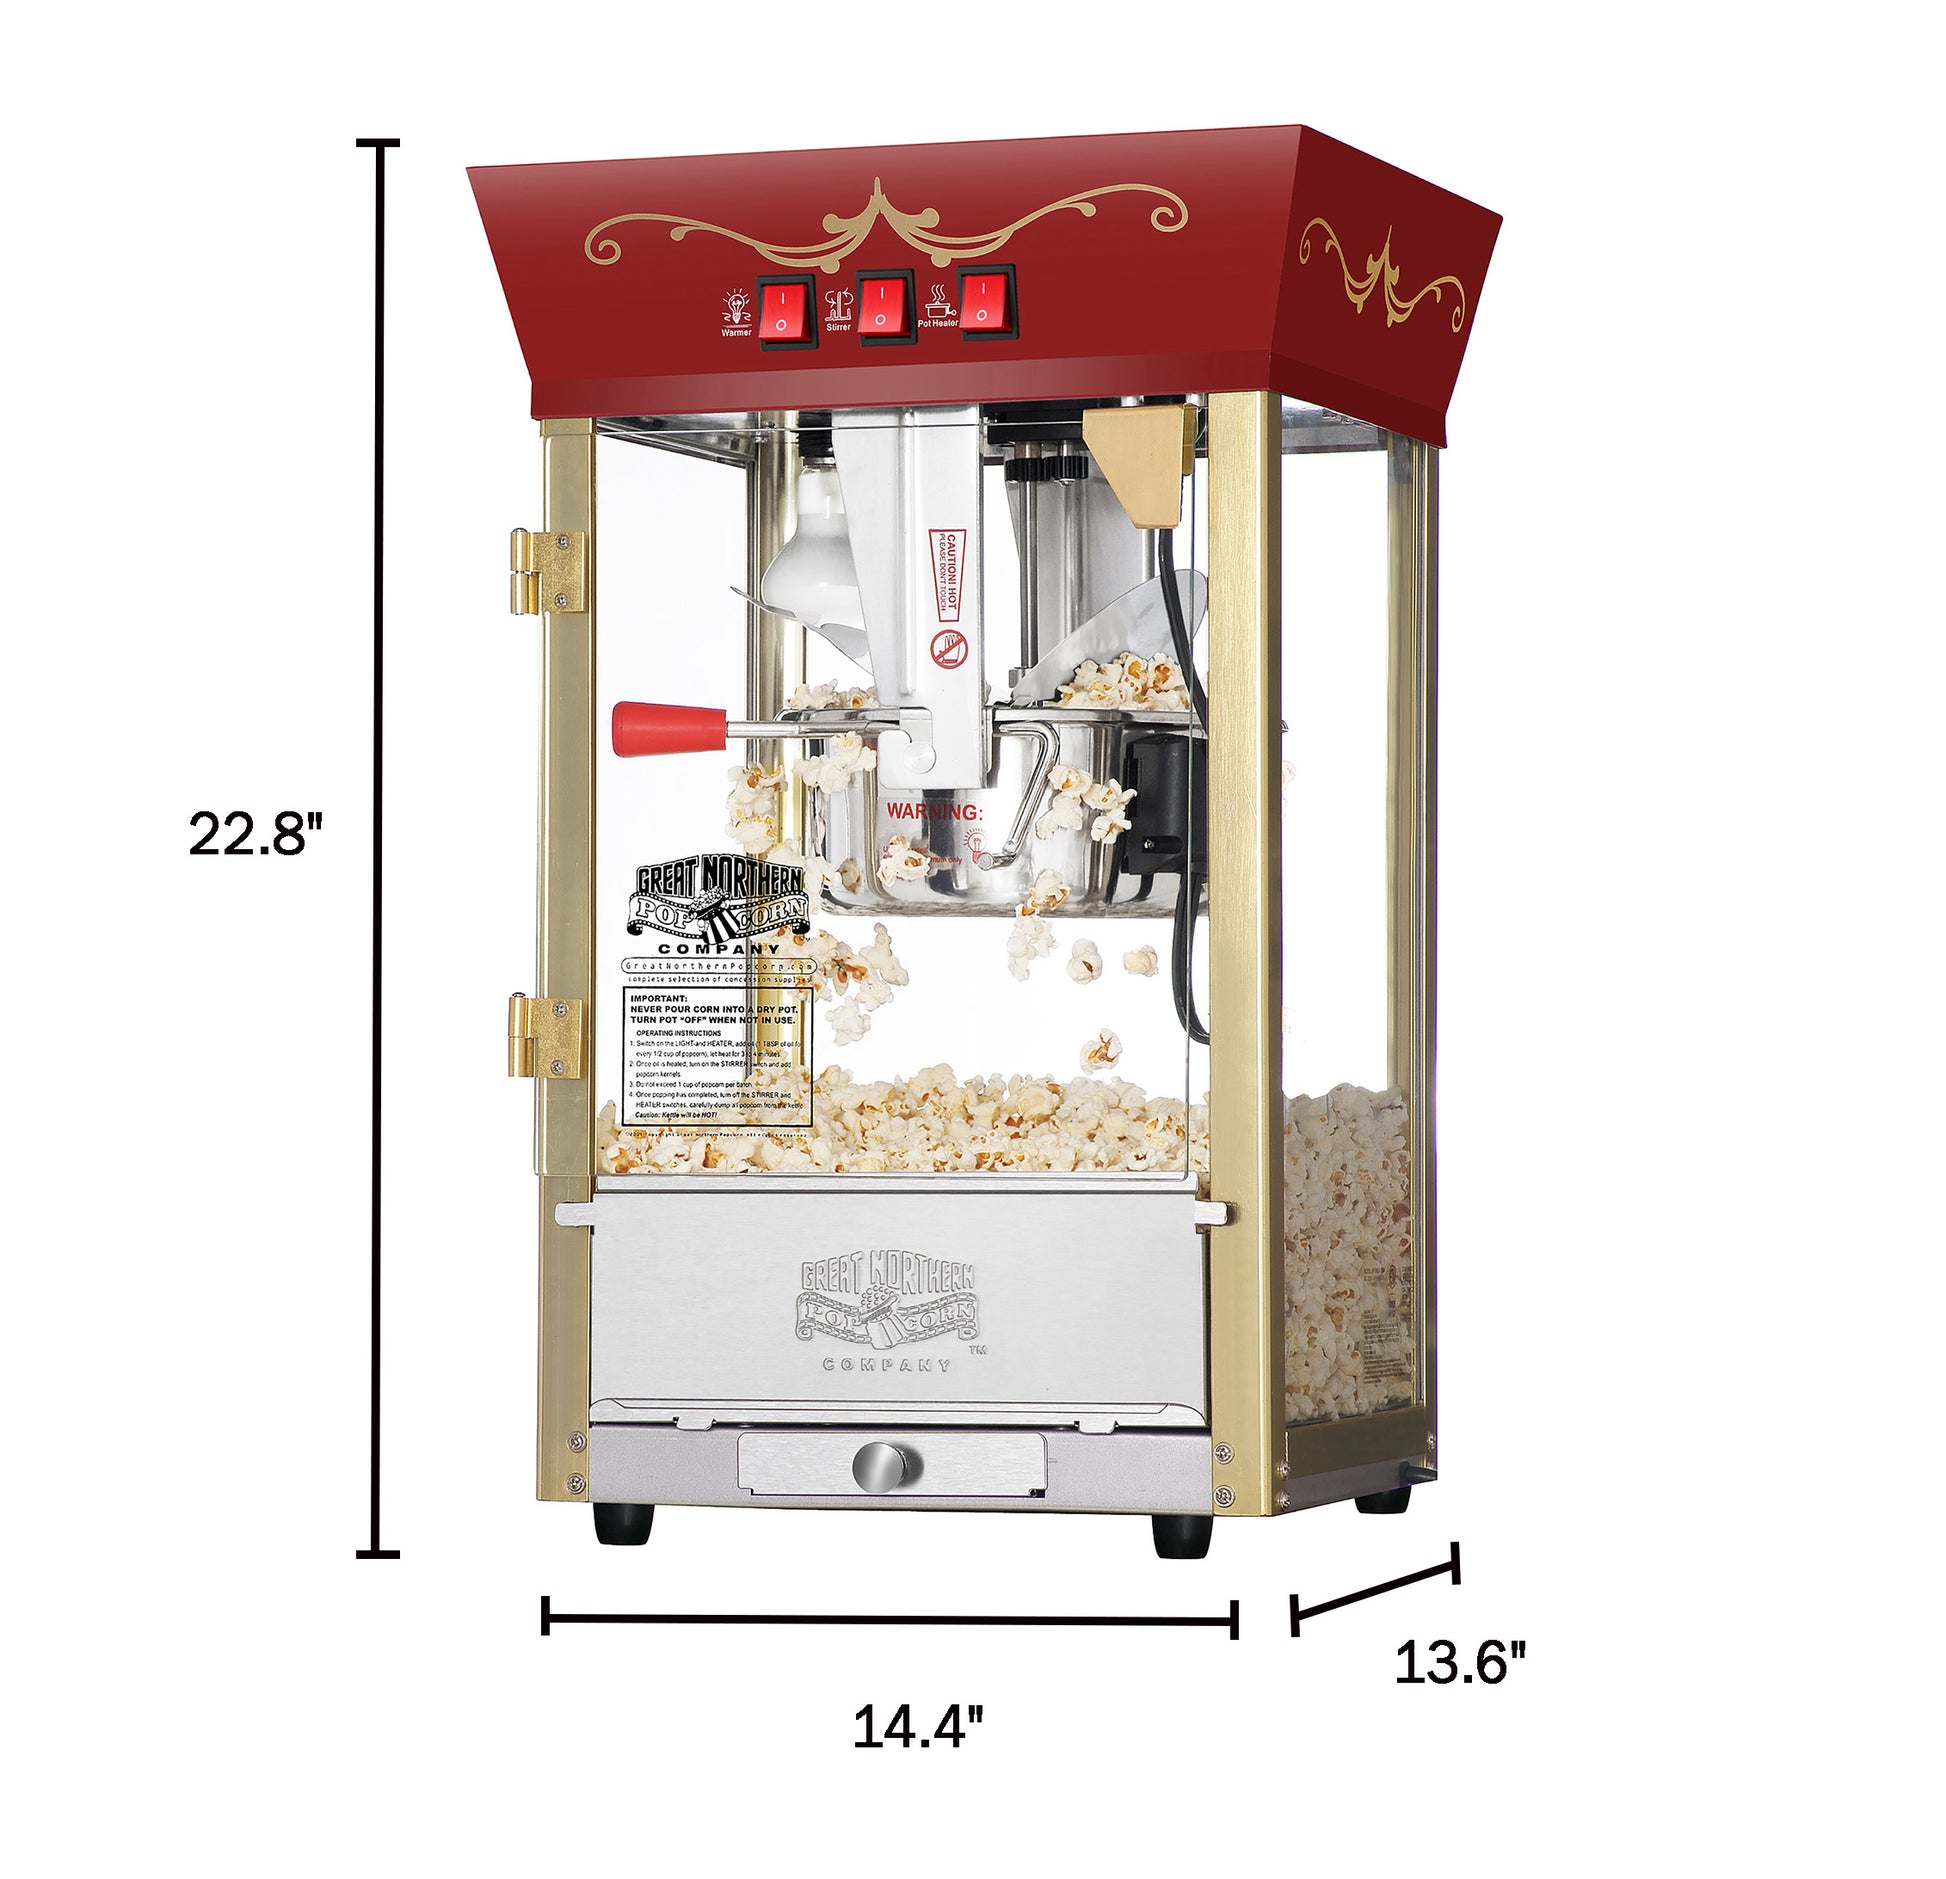 Great Northern Red 6091 Matinee Movie 8-Ounce Antique Popcorn Machine